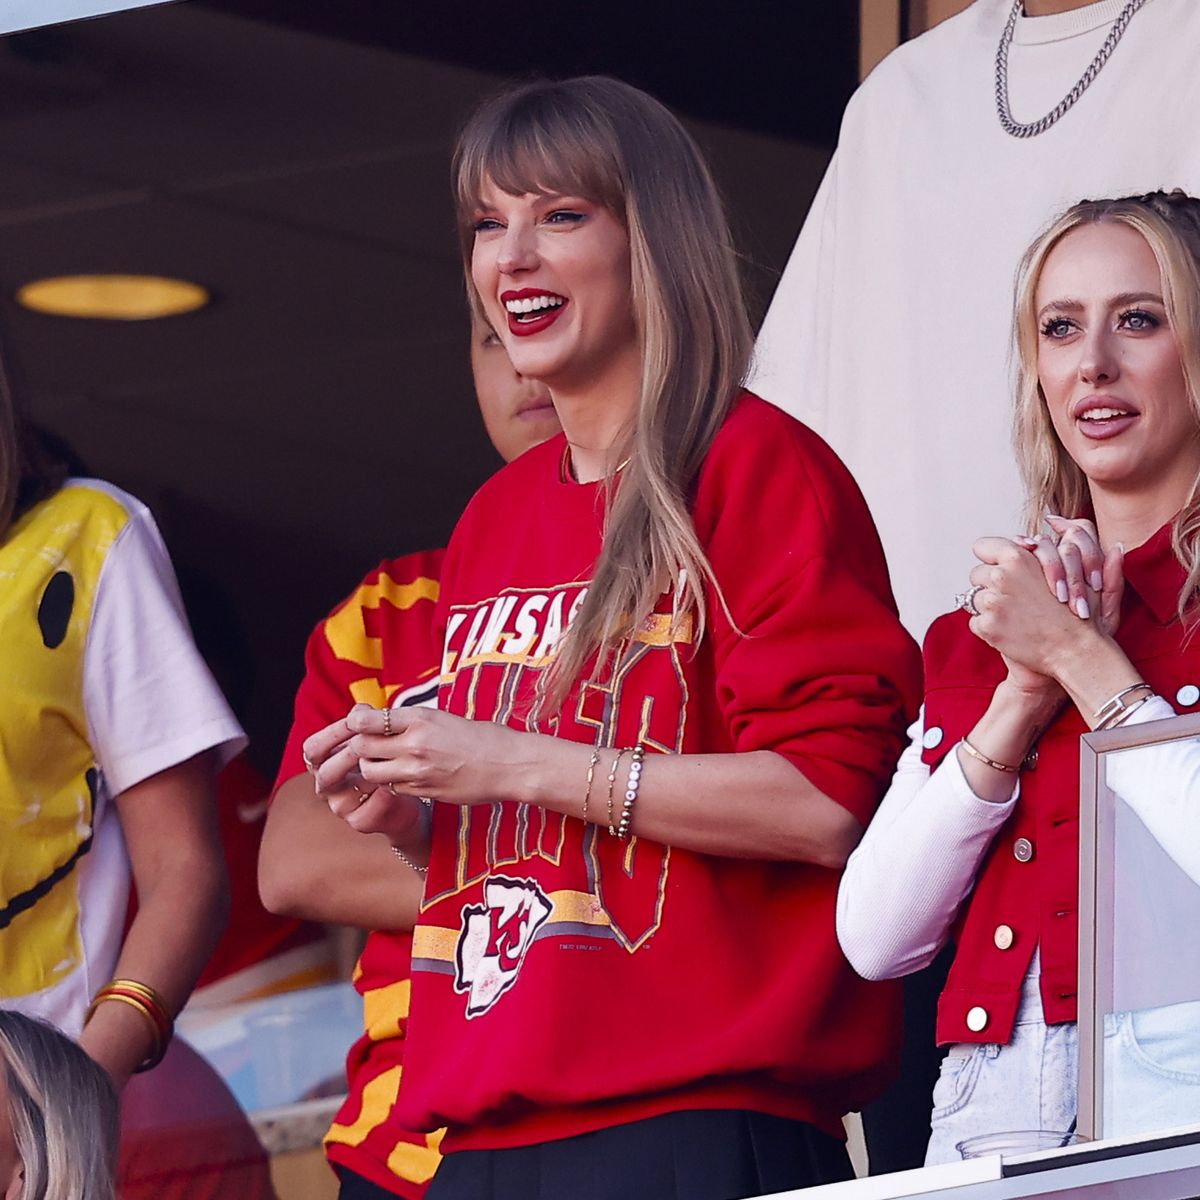 Taylor Swift's 4 Bracelets at Chiefs Game Have Sweet, Hidden